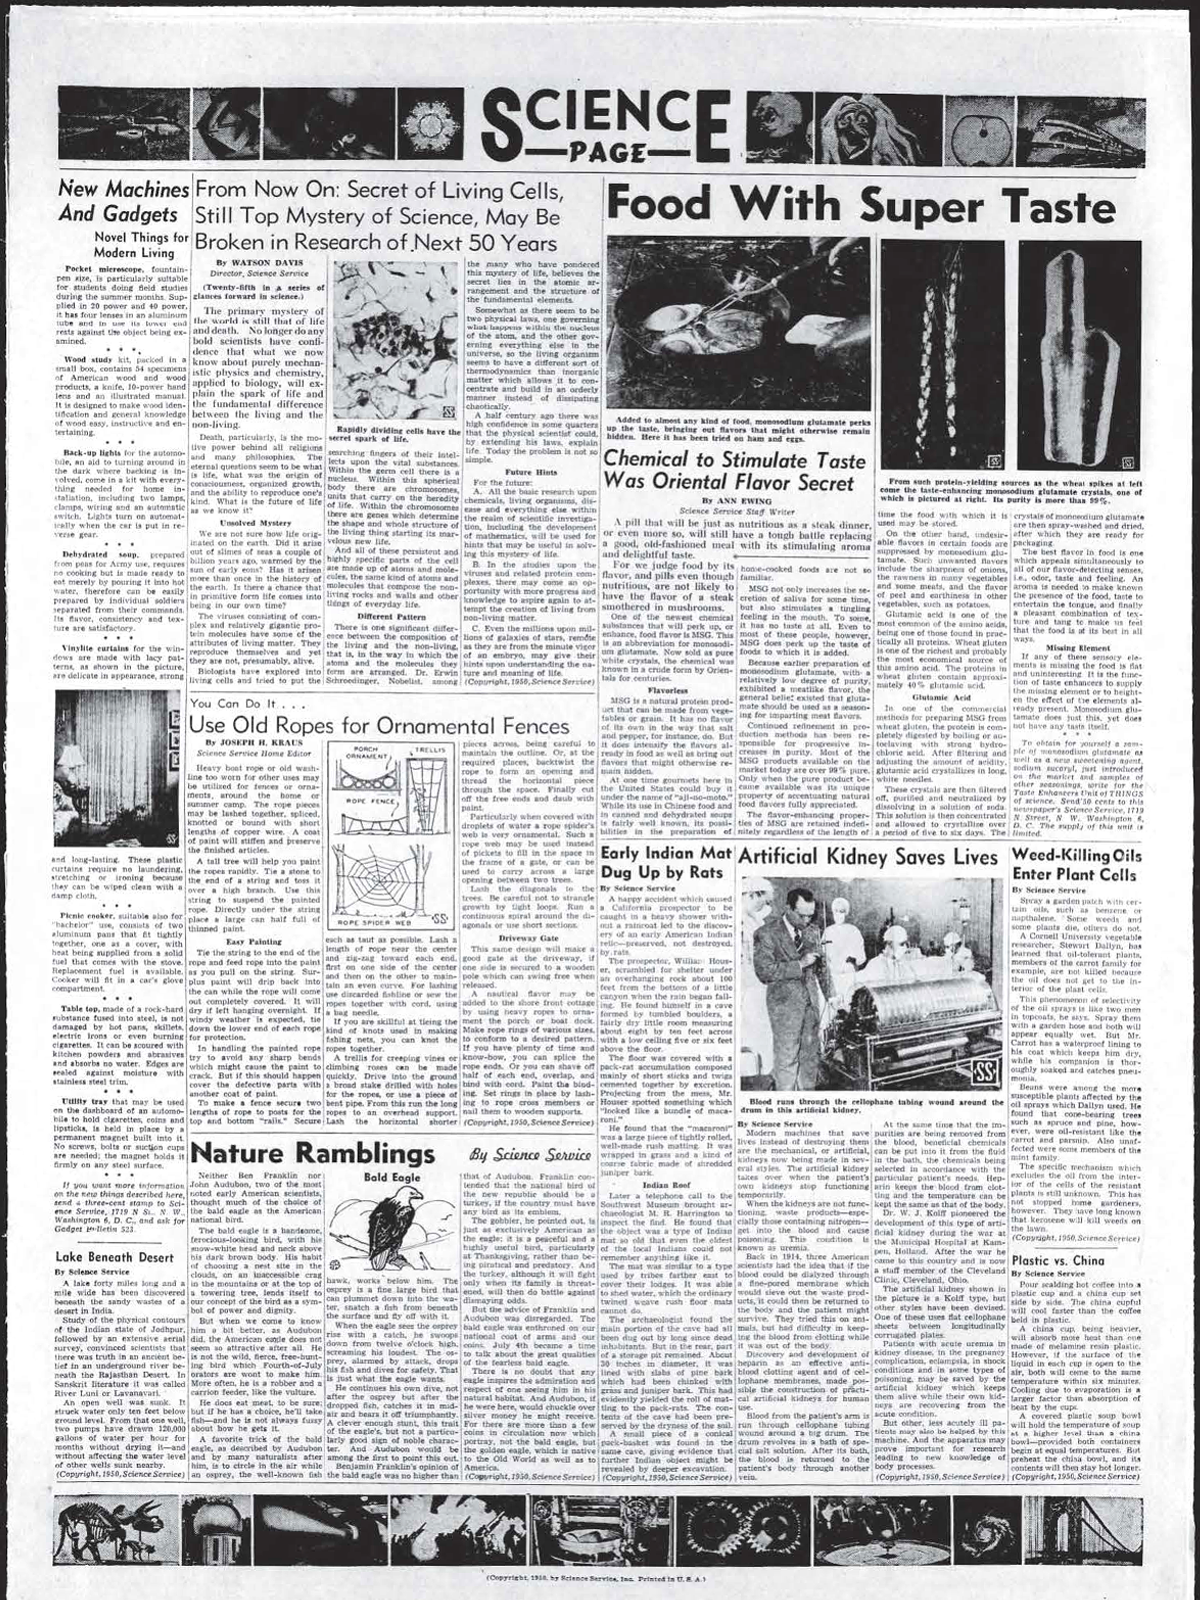 1966: Science News Letter becomes Science News - Society for Science Centennial